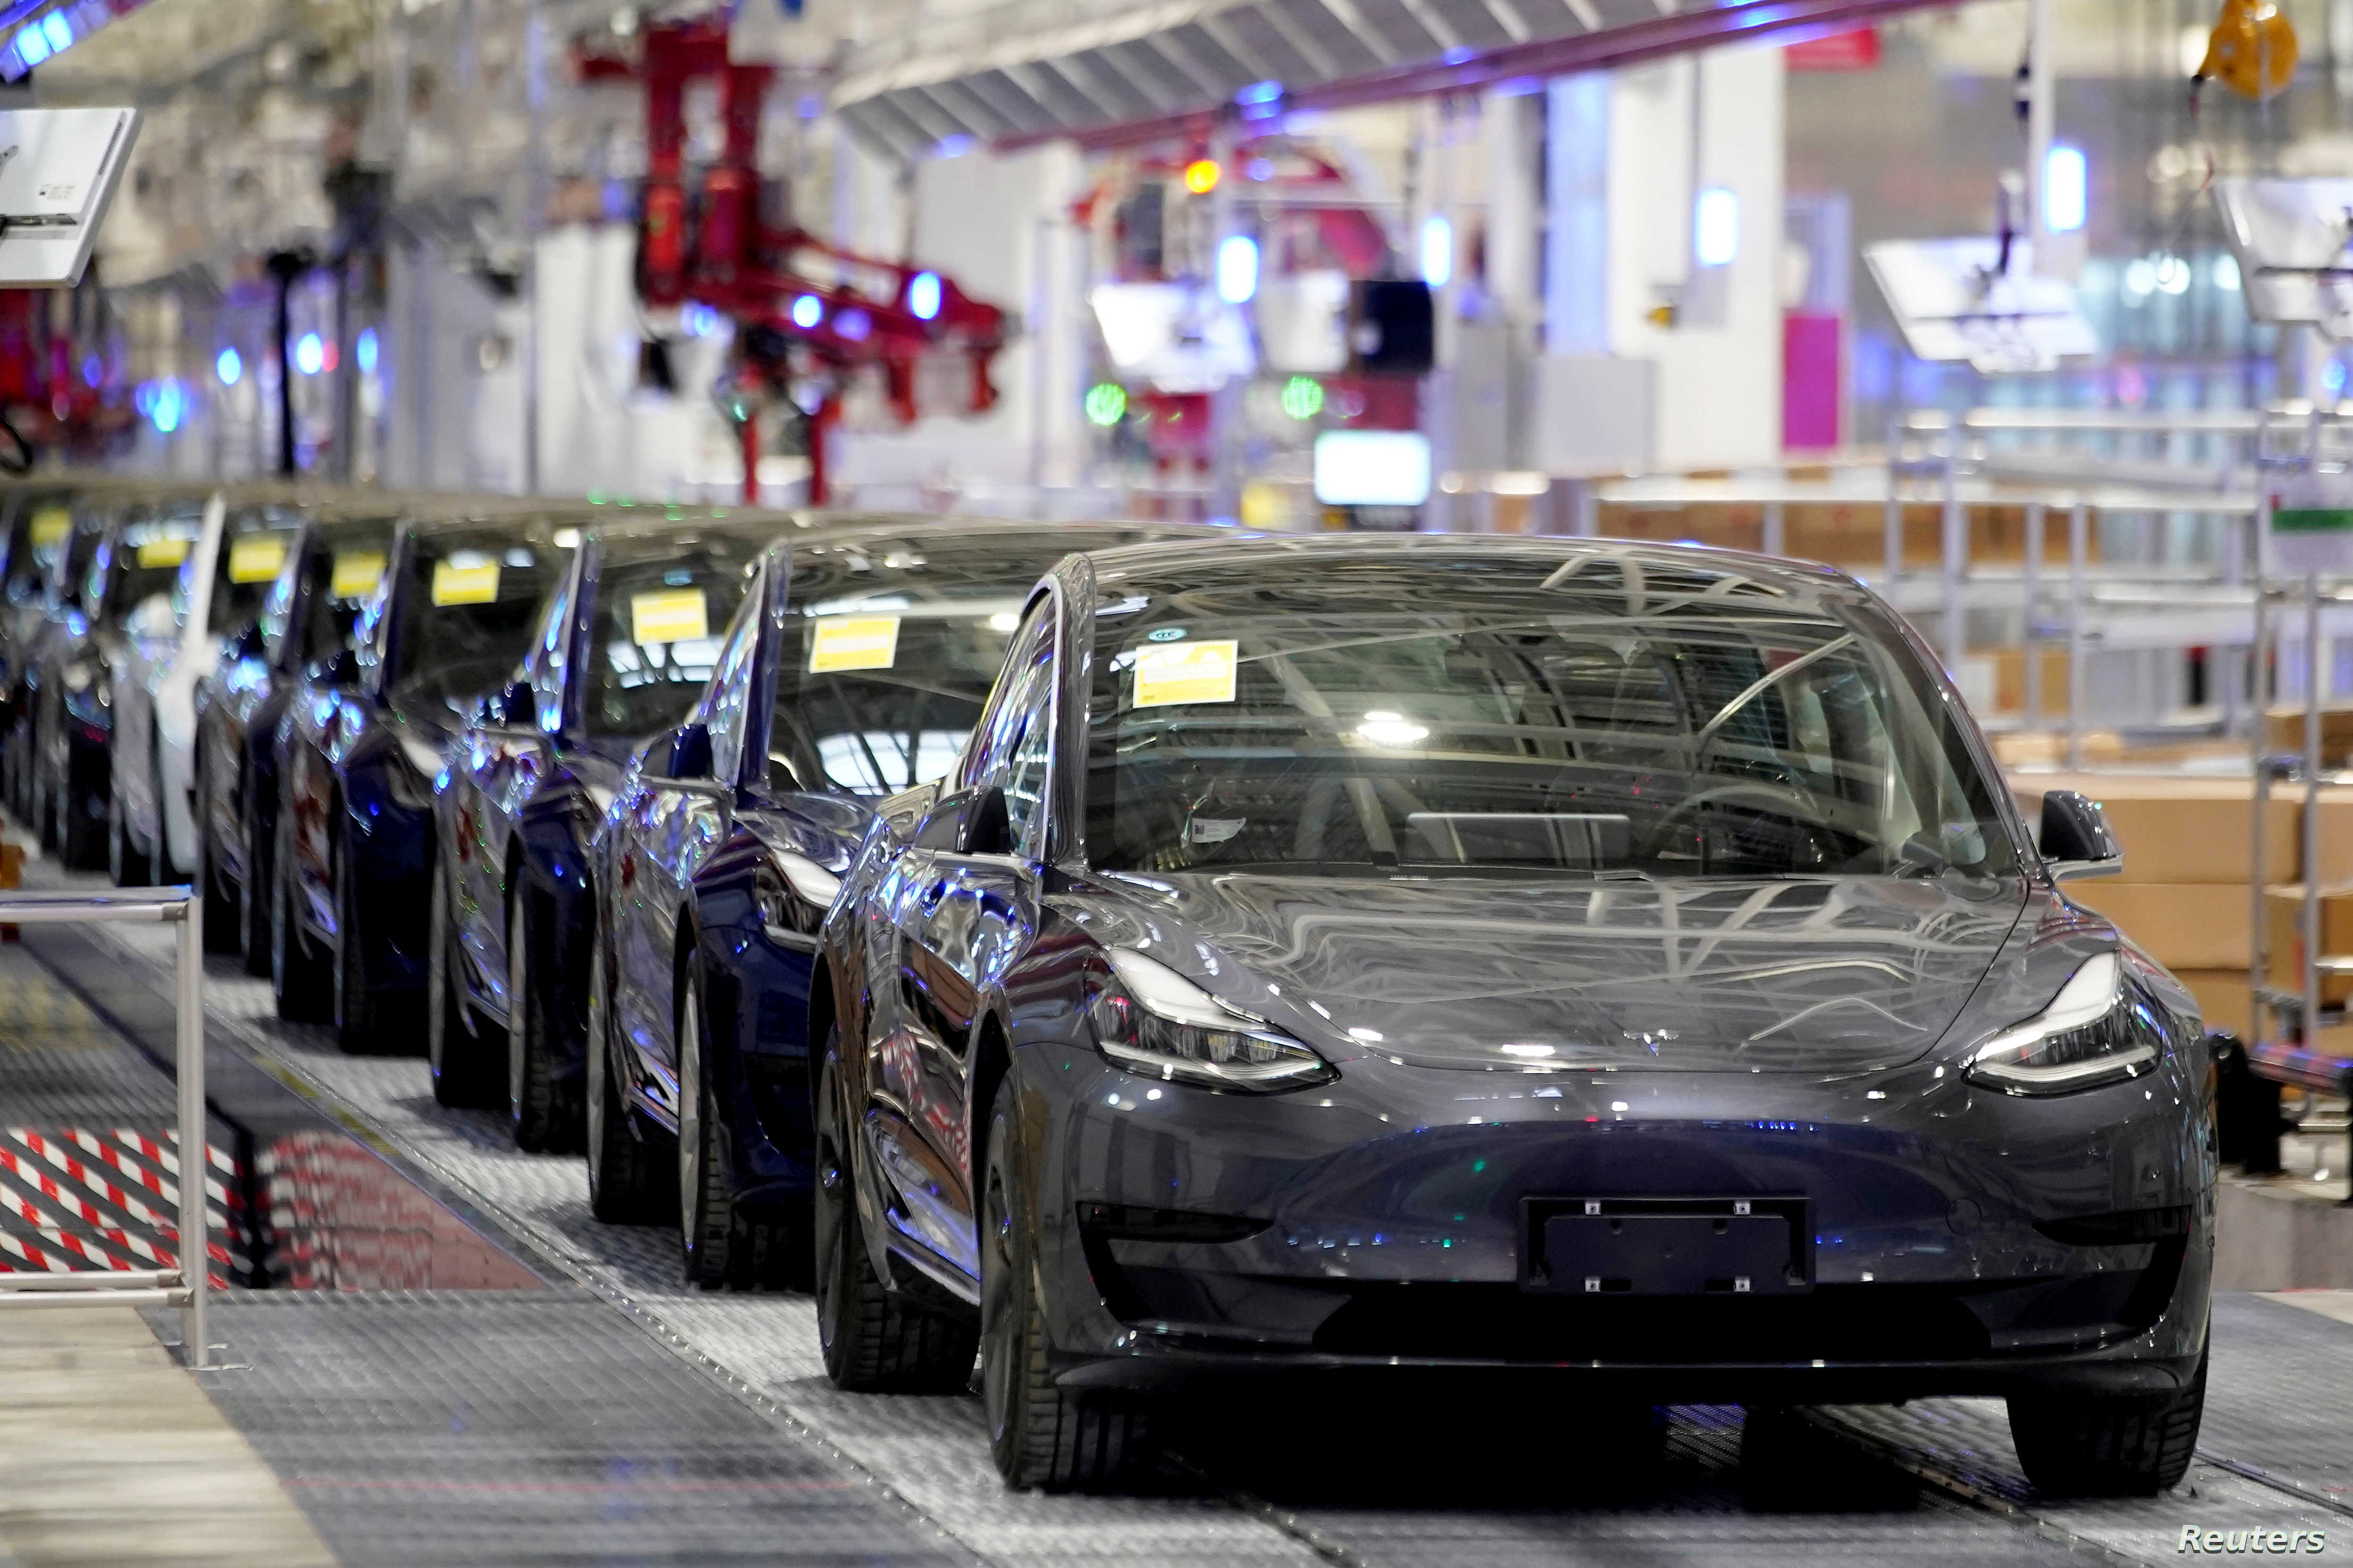 Tesla's new car registration in China is rise at a staggering rate